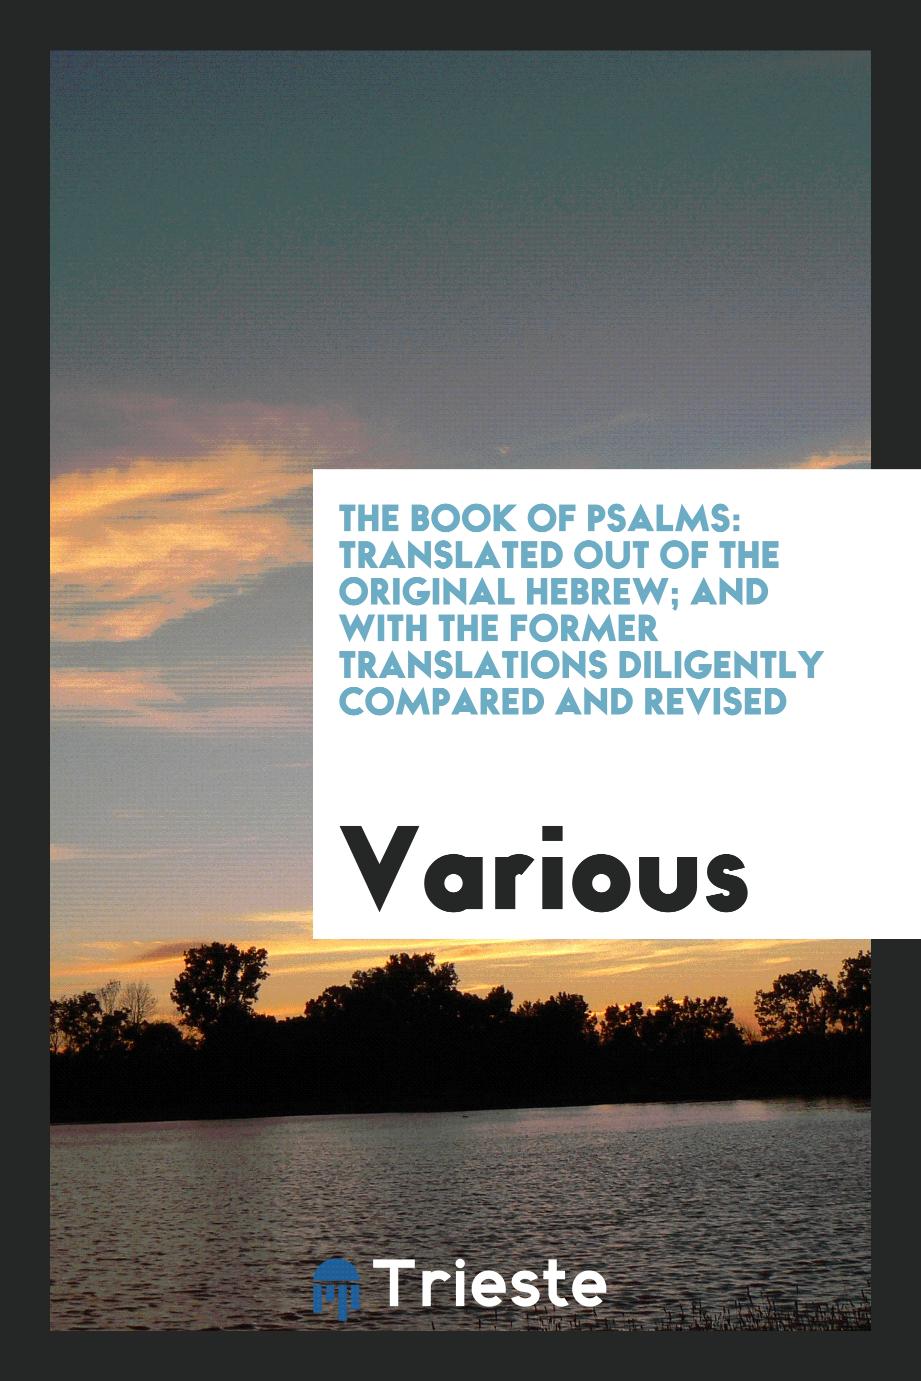 The Book of Psalms: Translated out of the Original Hebrew; And with the Former Translations Diligently Compared and Revised